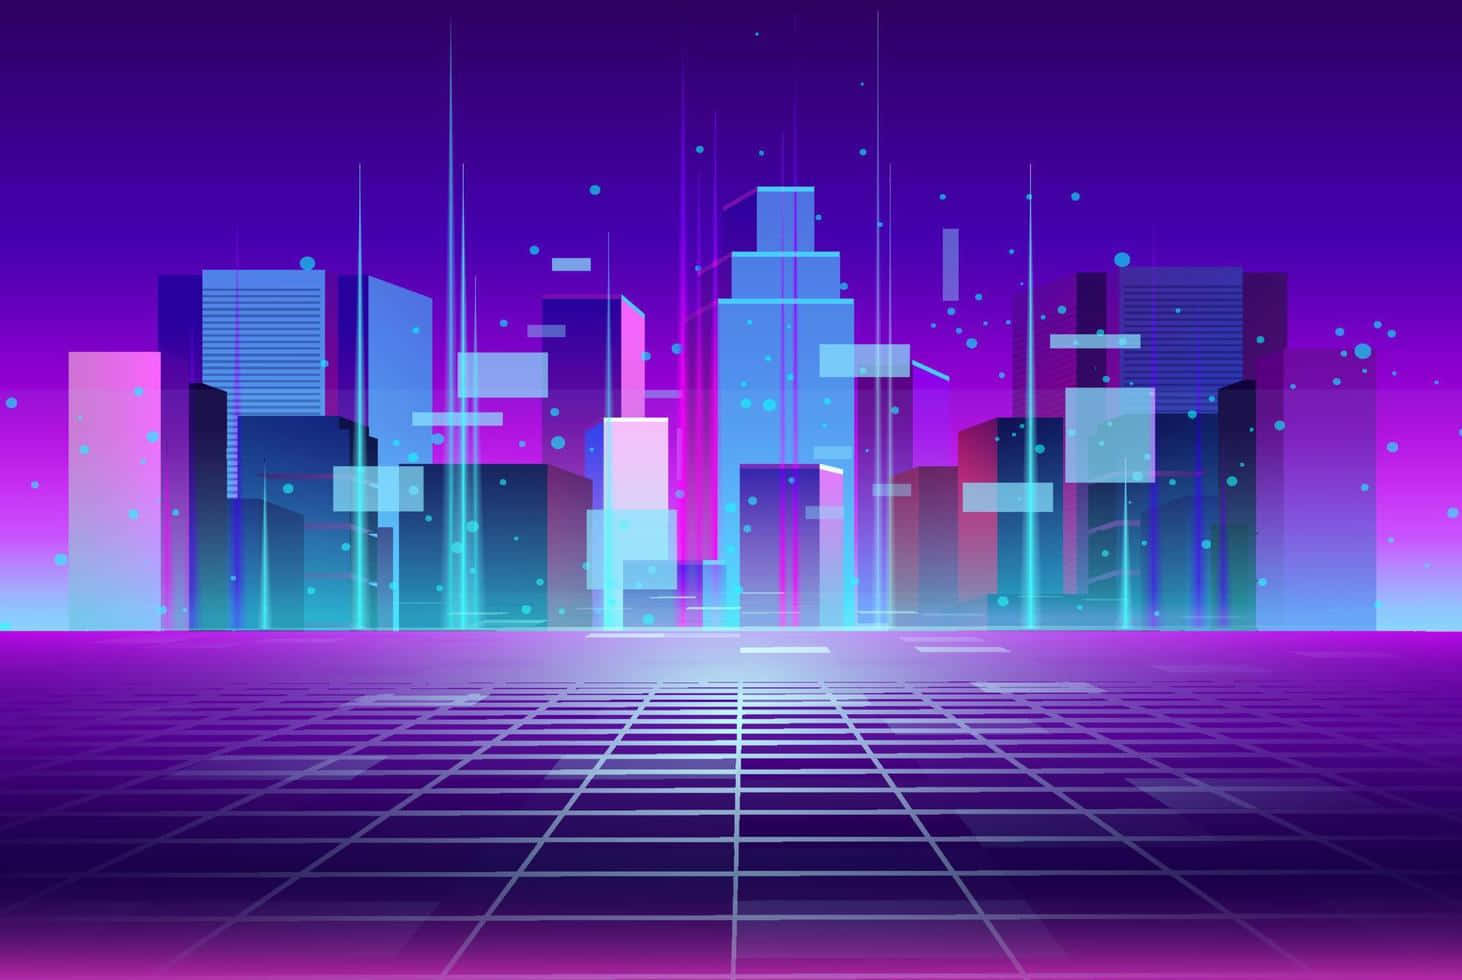 "Welcome to Synthwave City, where the energy never dies." Wallpaper